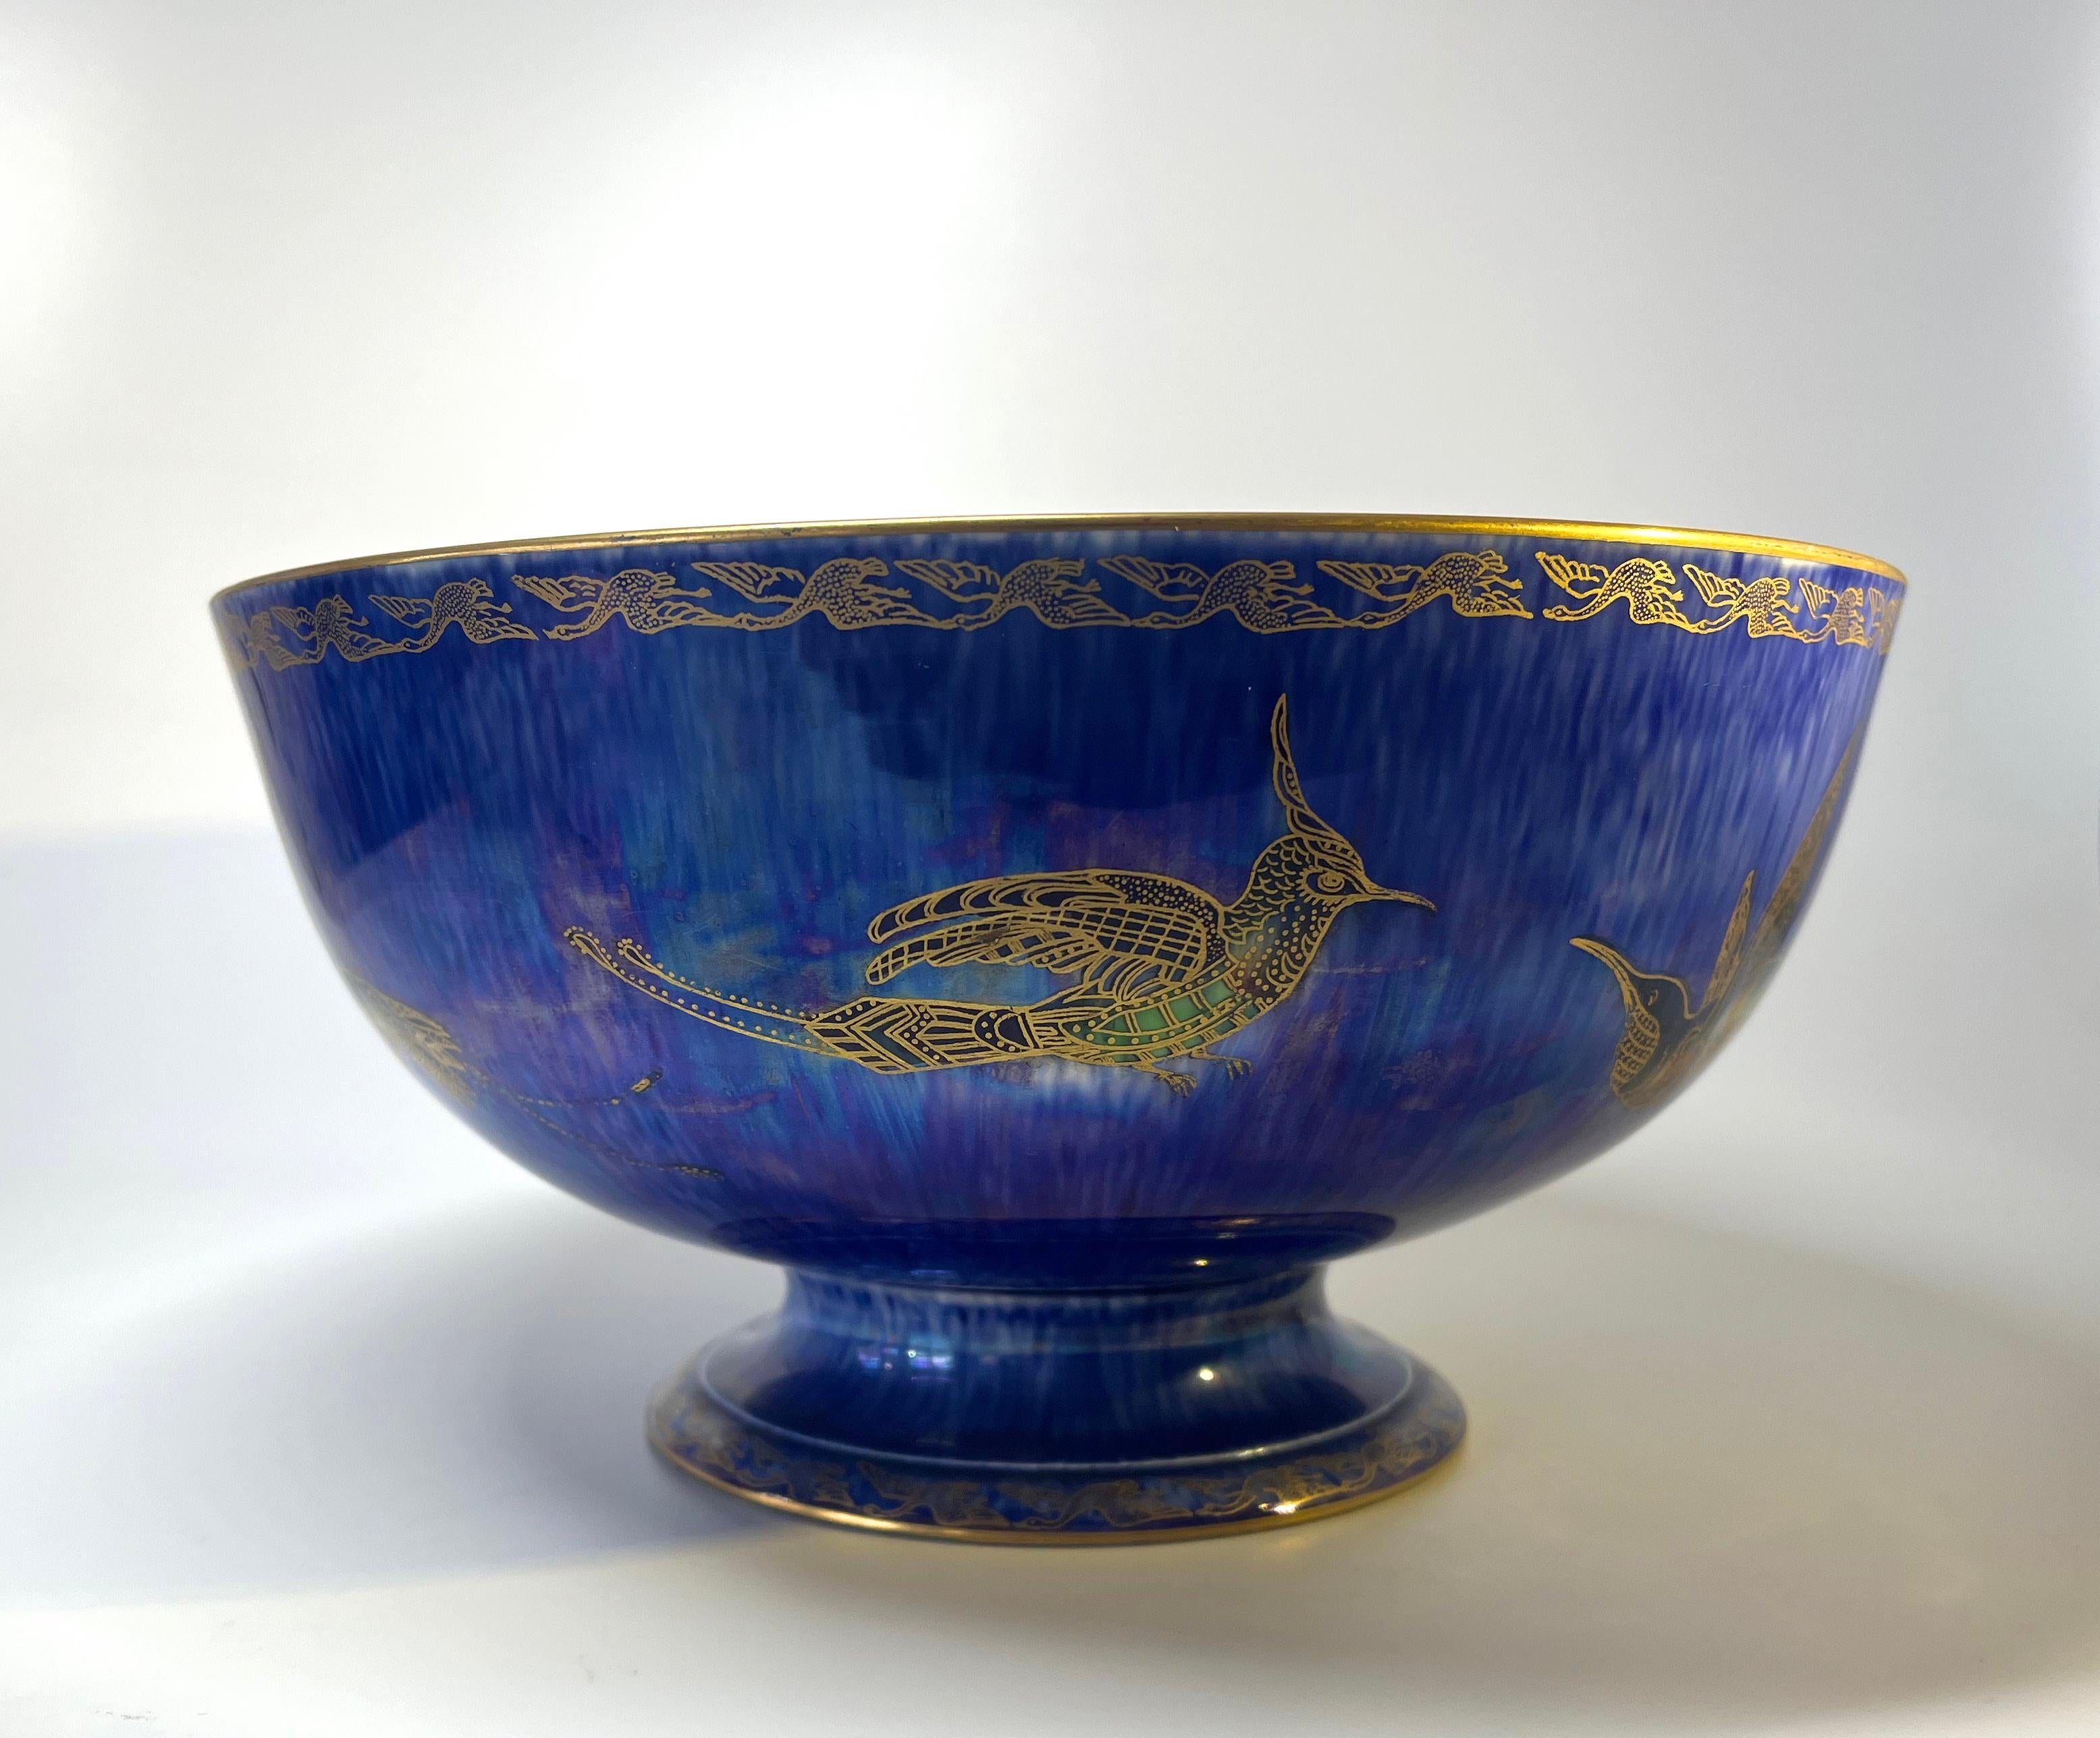 20th Century Monumental Wedgwood Ordinary Lustre Footed Bowl By Daisy Making-Jones For Sale